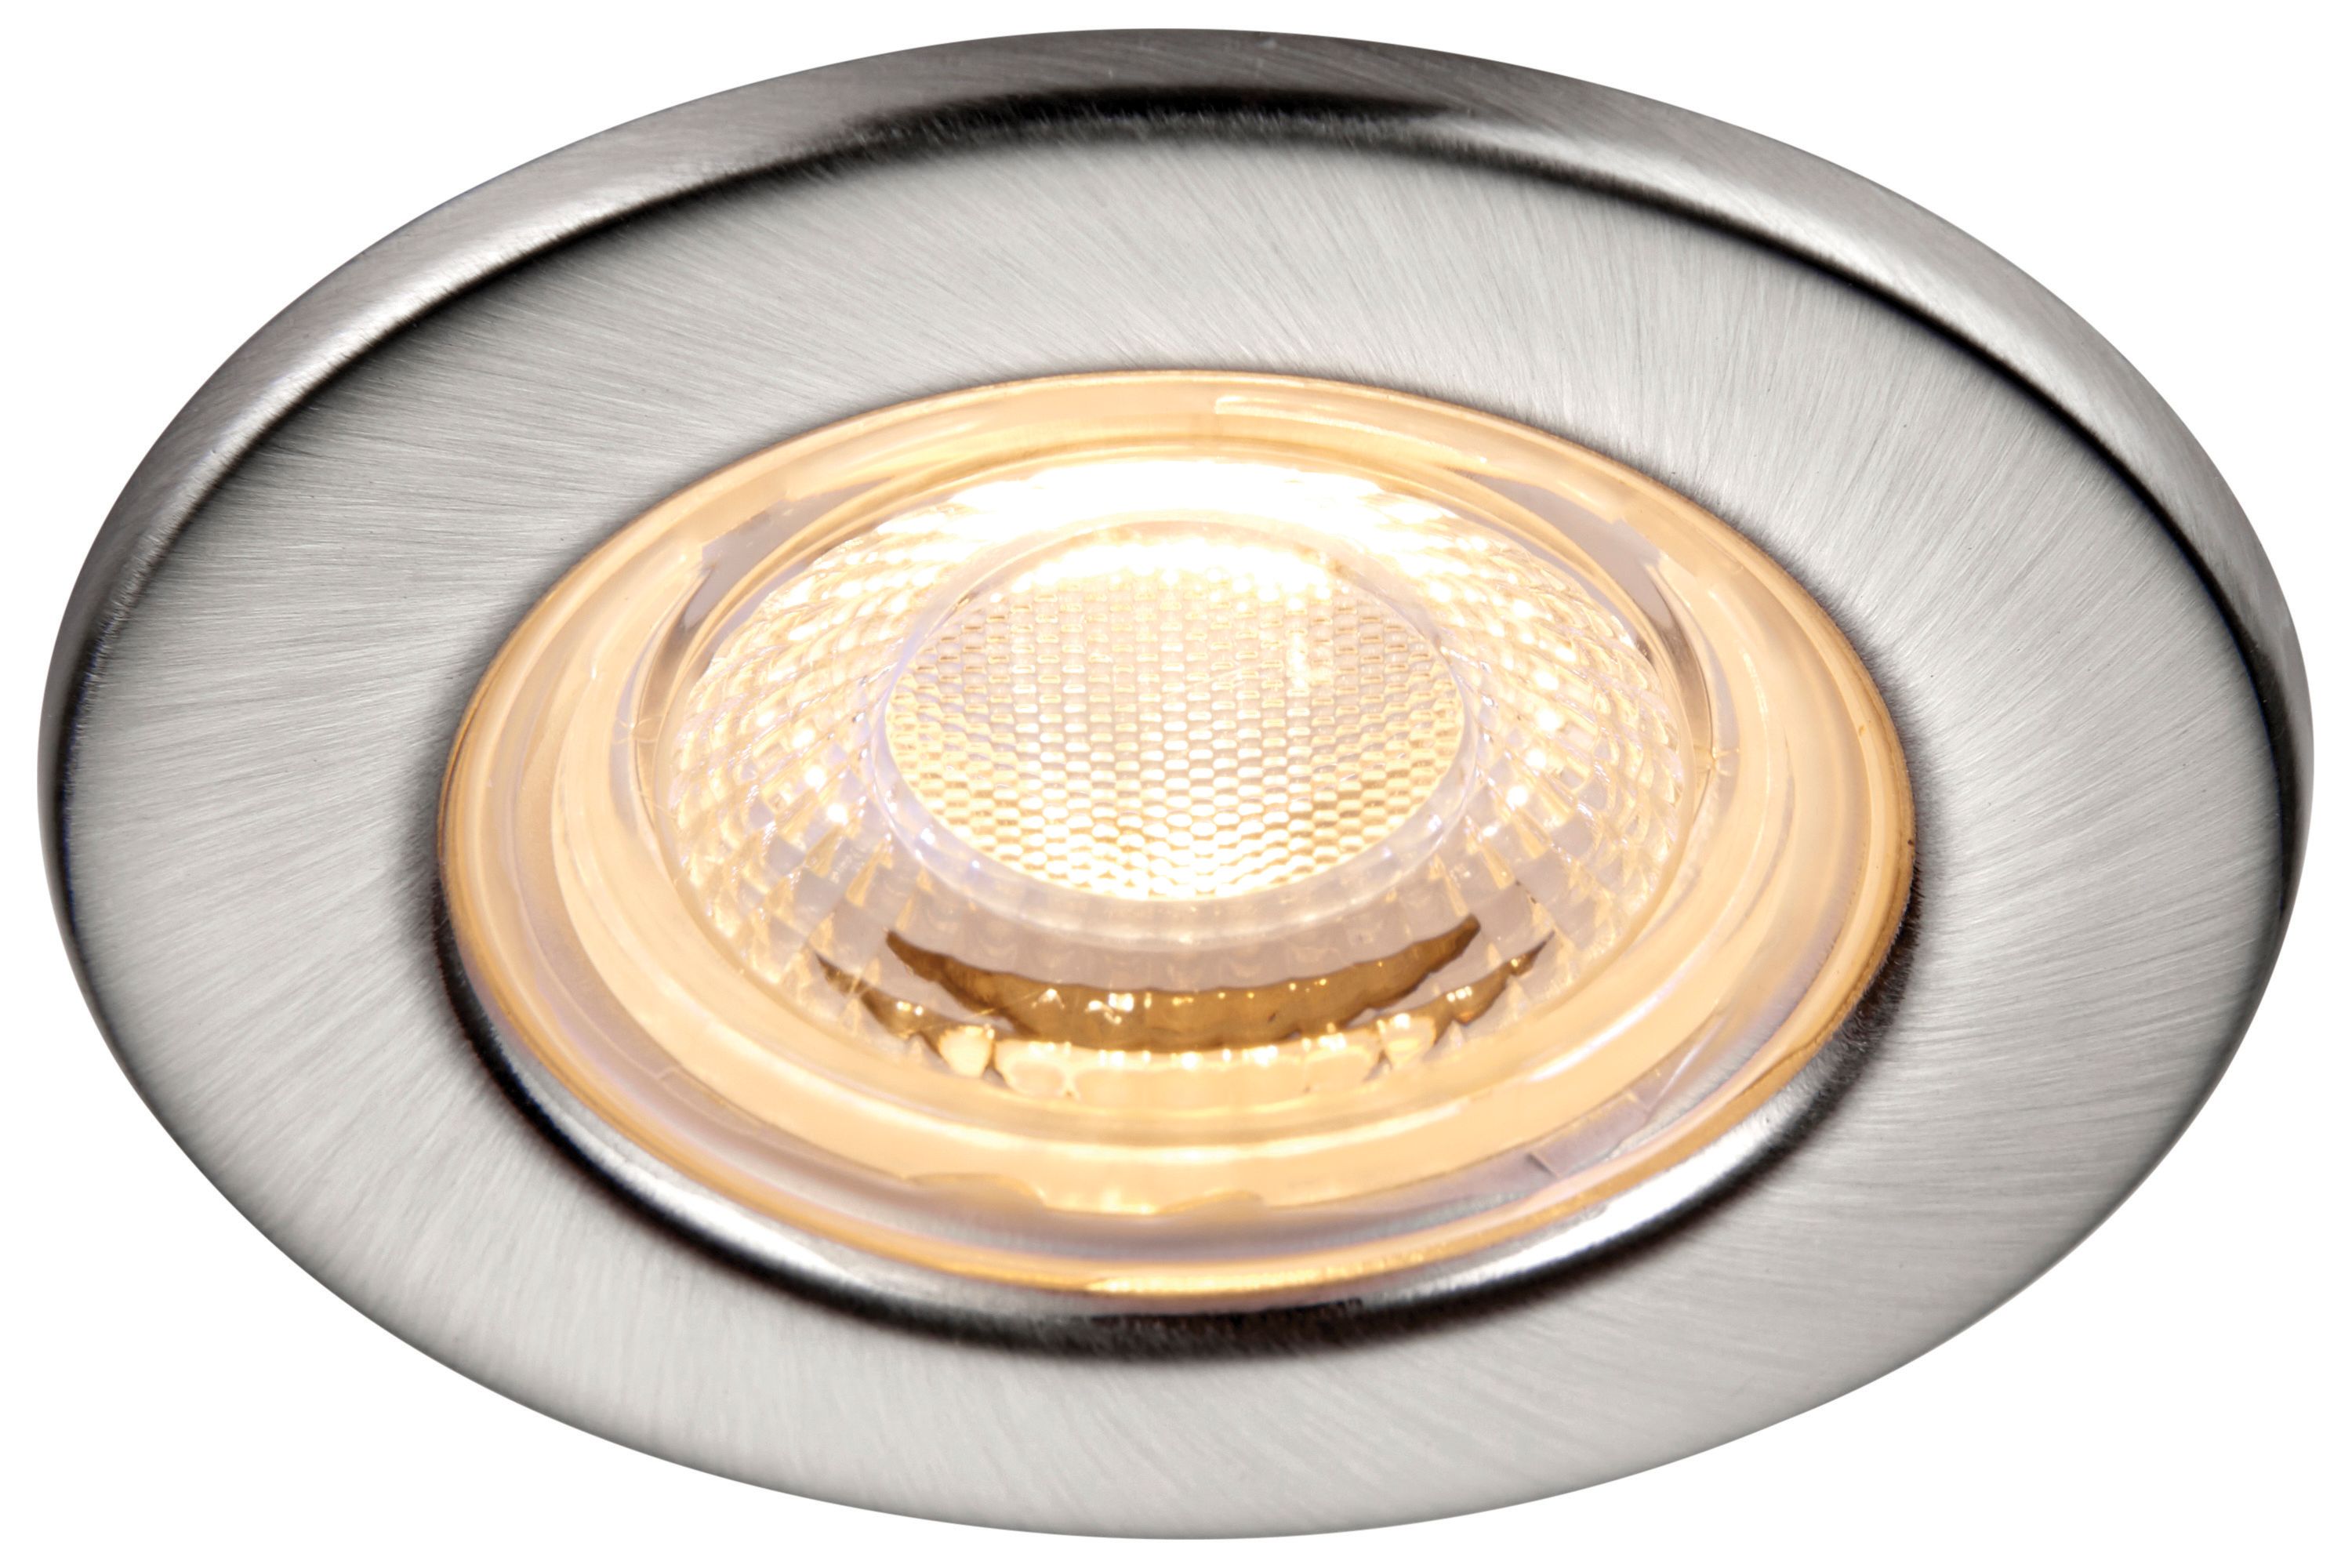 Saxby Integrated LED Fire Rated IP65 Brushed Nickel Fixed Warm White Downlight